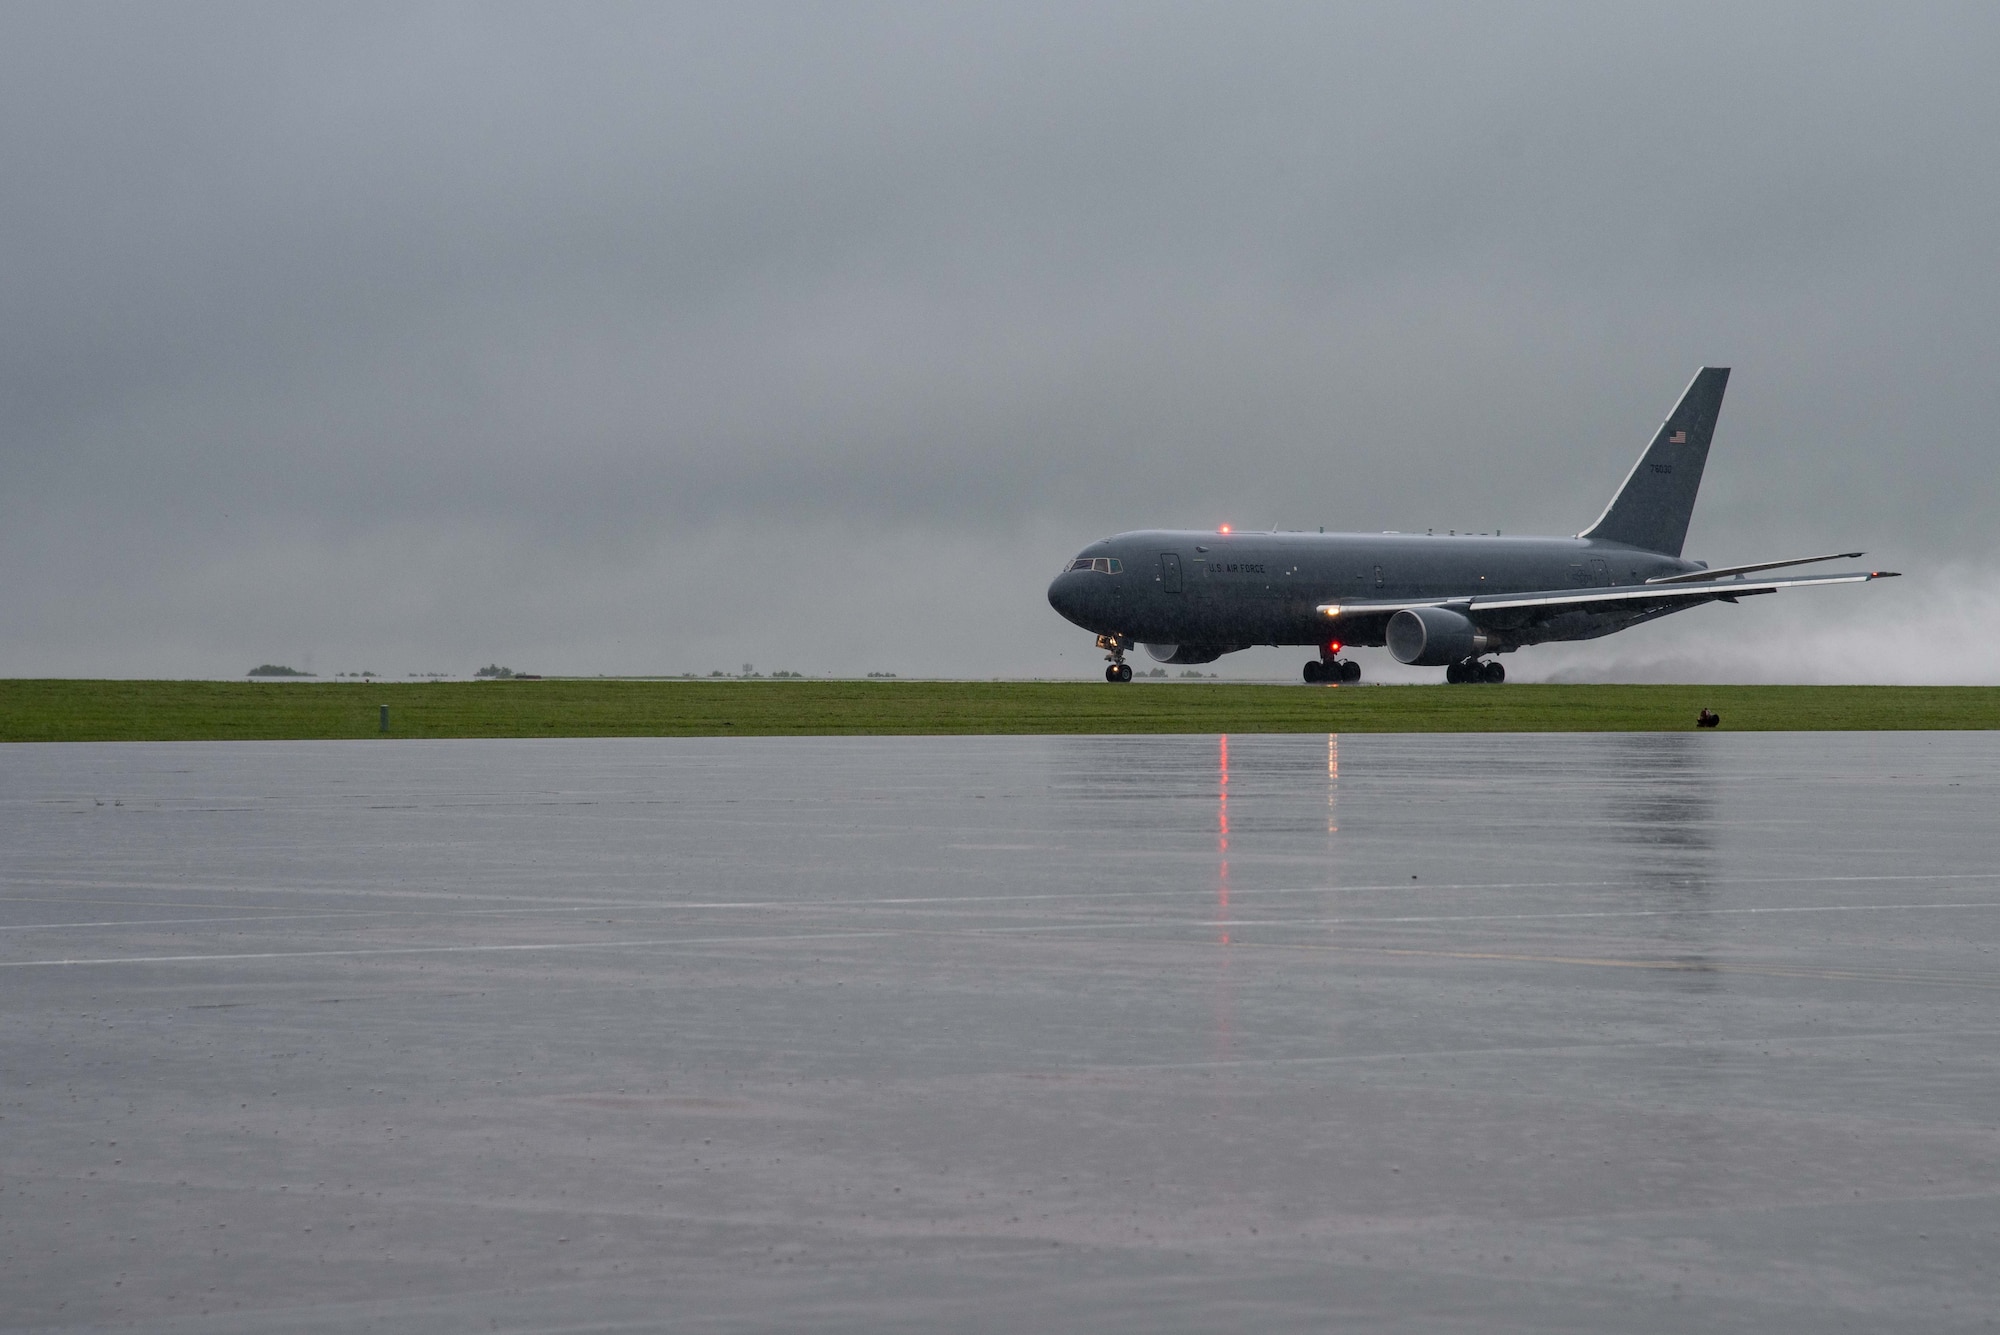 A U.S. Air Force KC-46A Pegasus takes off at McConnell Air Force Base, Kansas, June 30, 2021. Two high-bypass turbofans power the KC-46A to takeoff at gross weights up to 415,000 pounds. Depending on fuel storage configuration, the aircraft can carry a palletized load of up to 65,000 pounds of cargo. (U.S. Air Force photo by Airman 1st Class Zachary Willis)